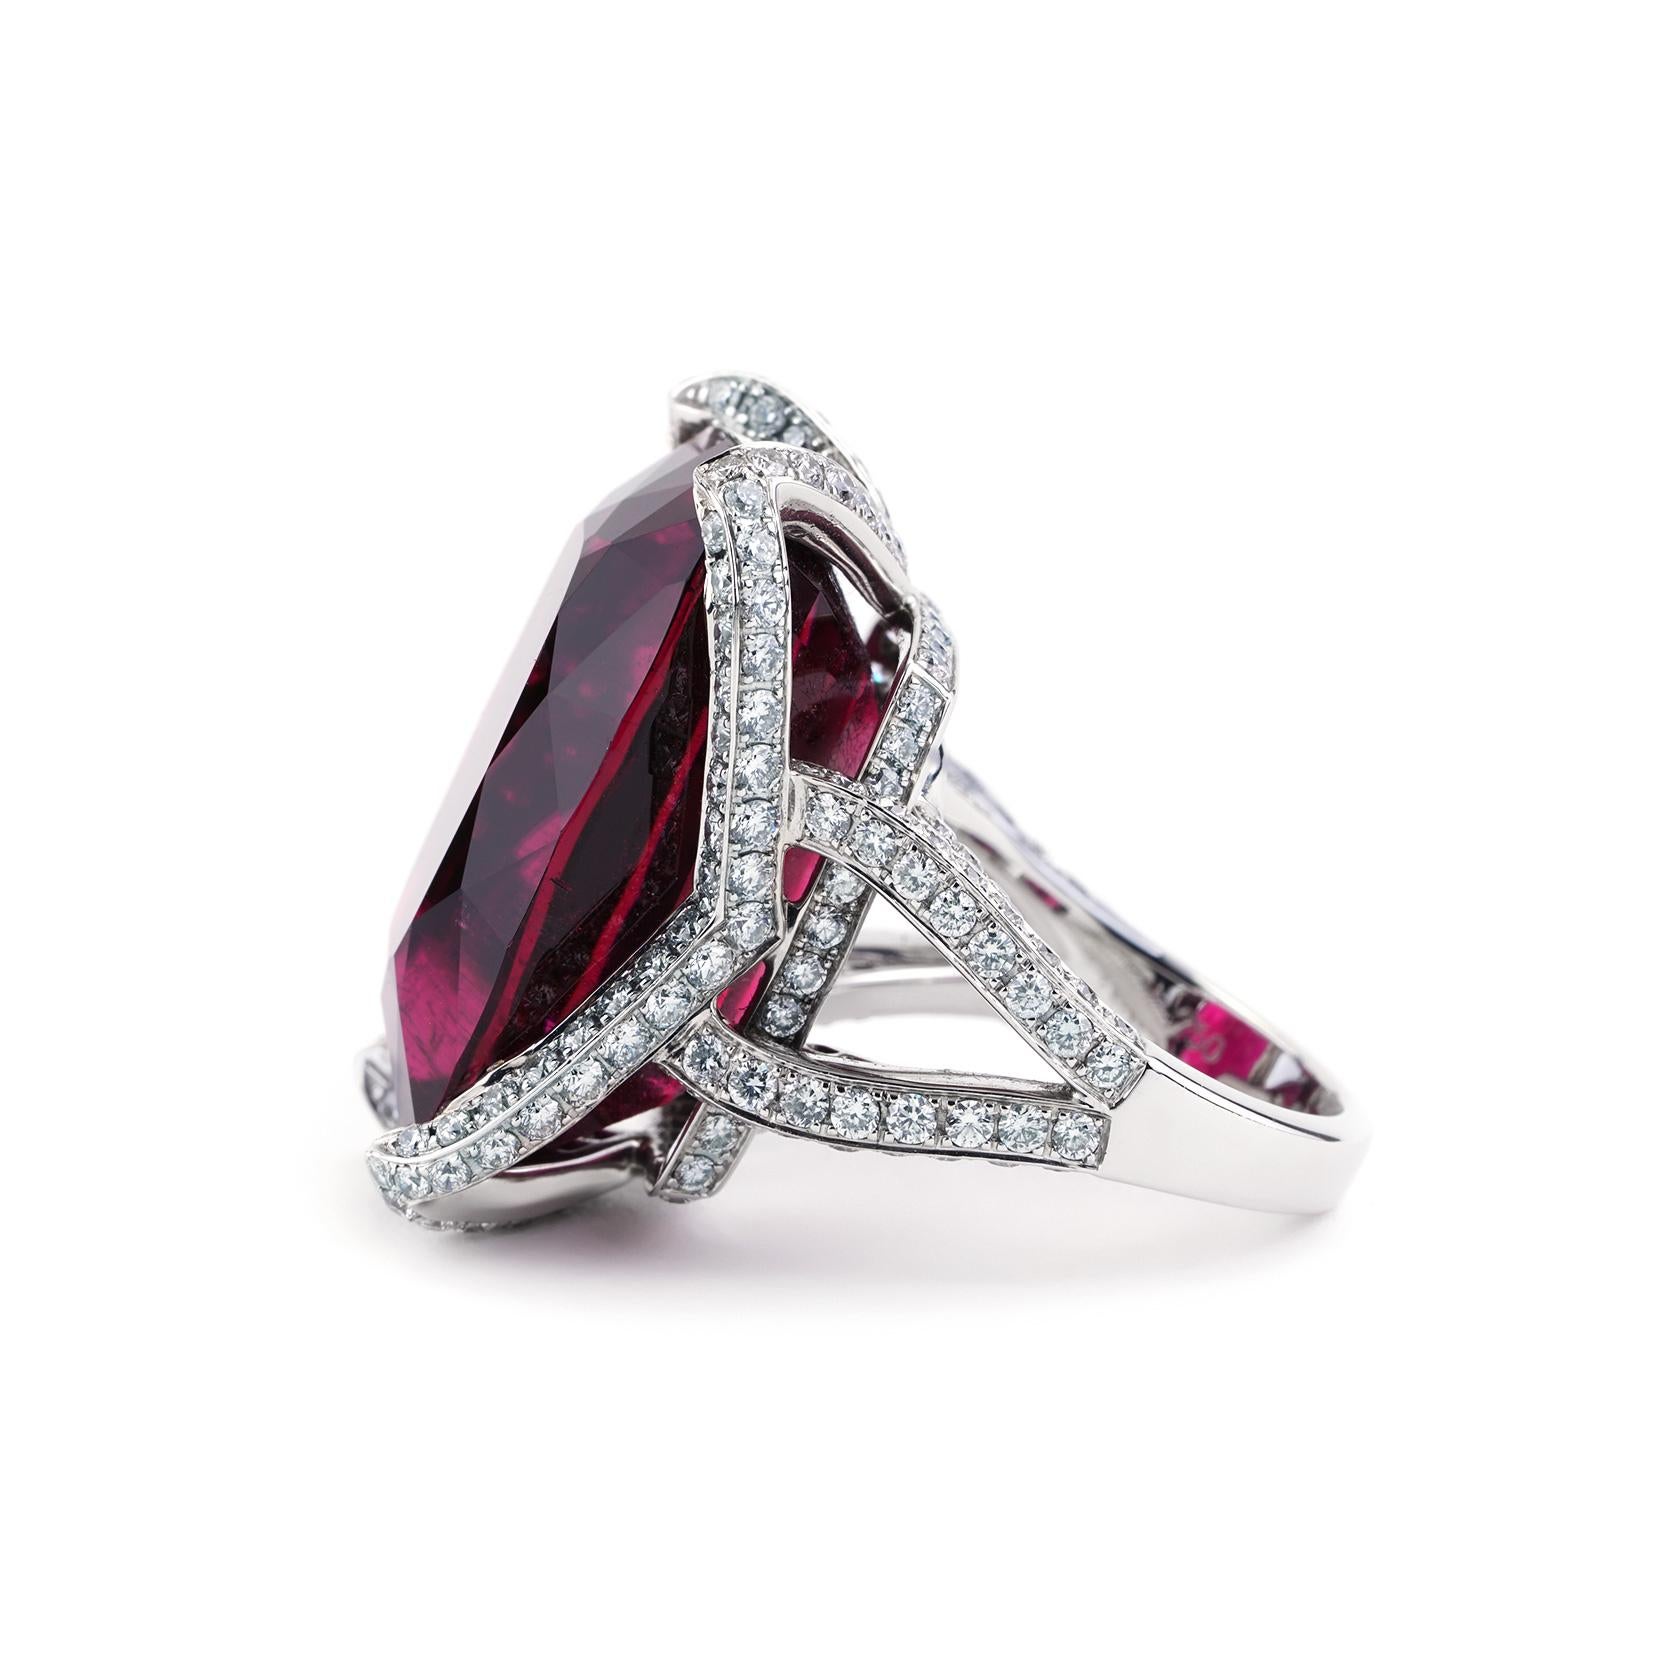 Antique Cushion Cut Very Rare 38.21 Carat Rubellite and Diamond Cocktail Ring in 18K White Gold For Sale